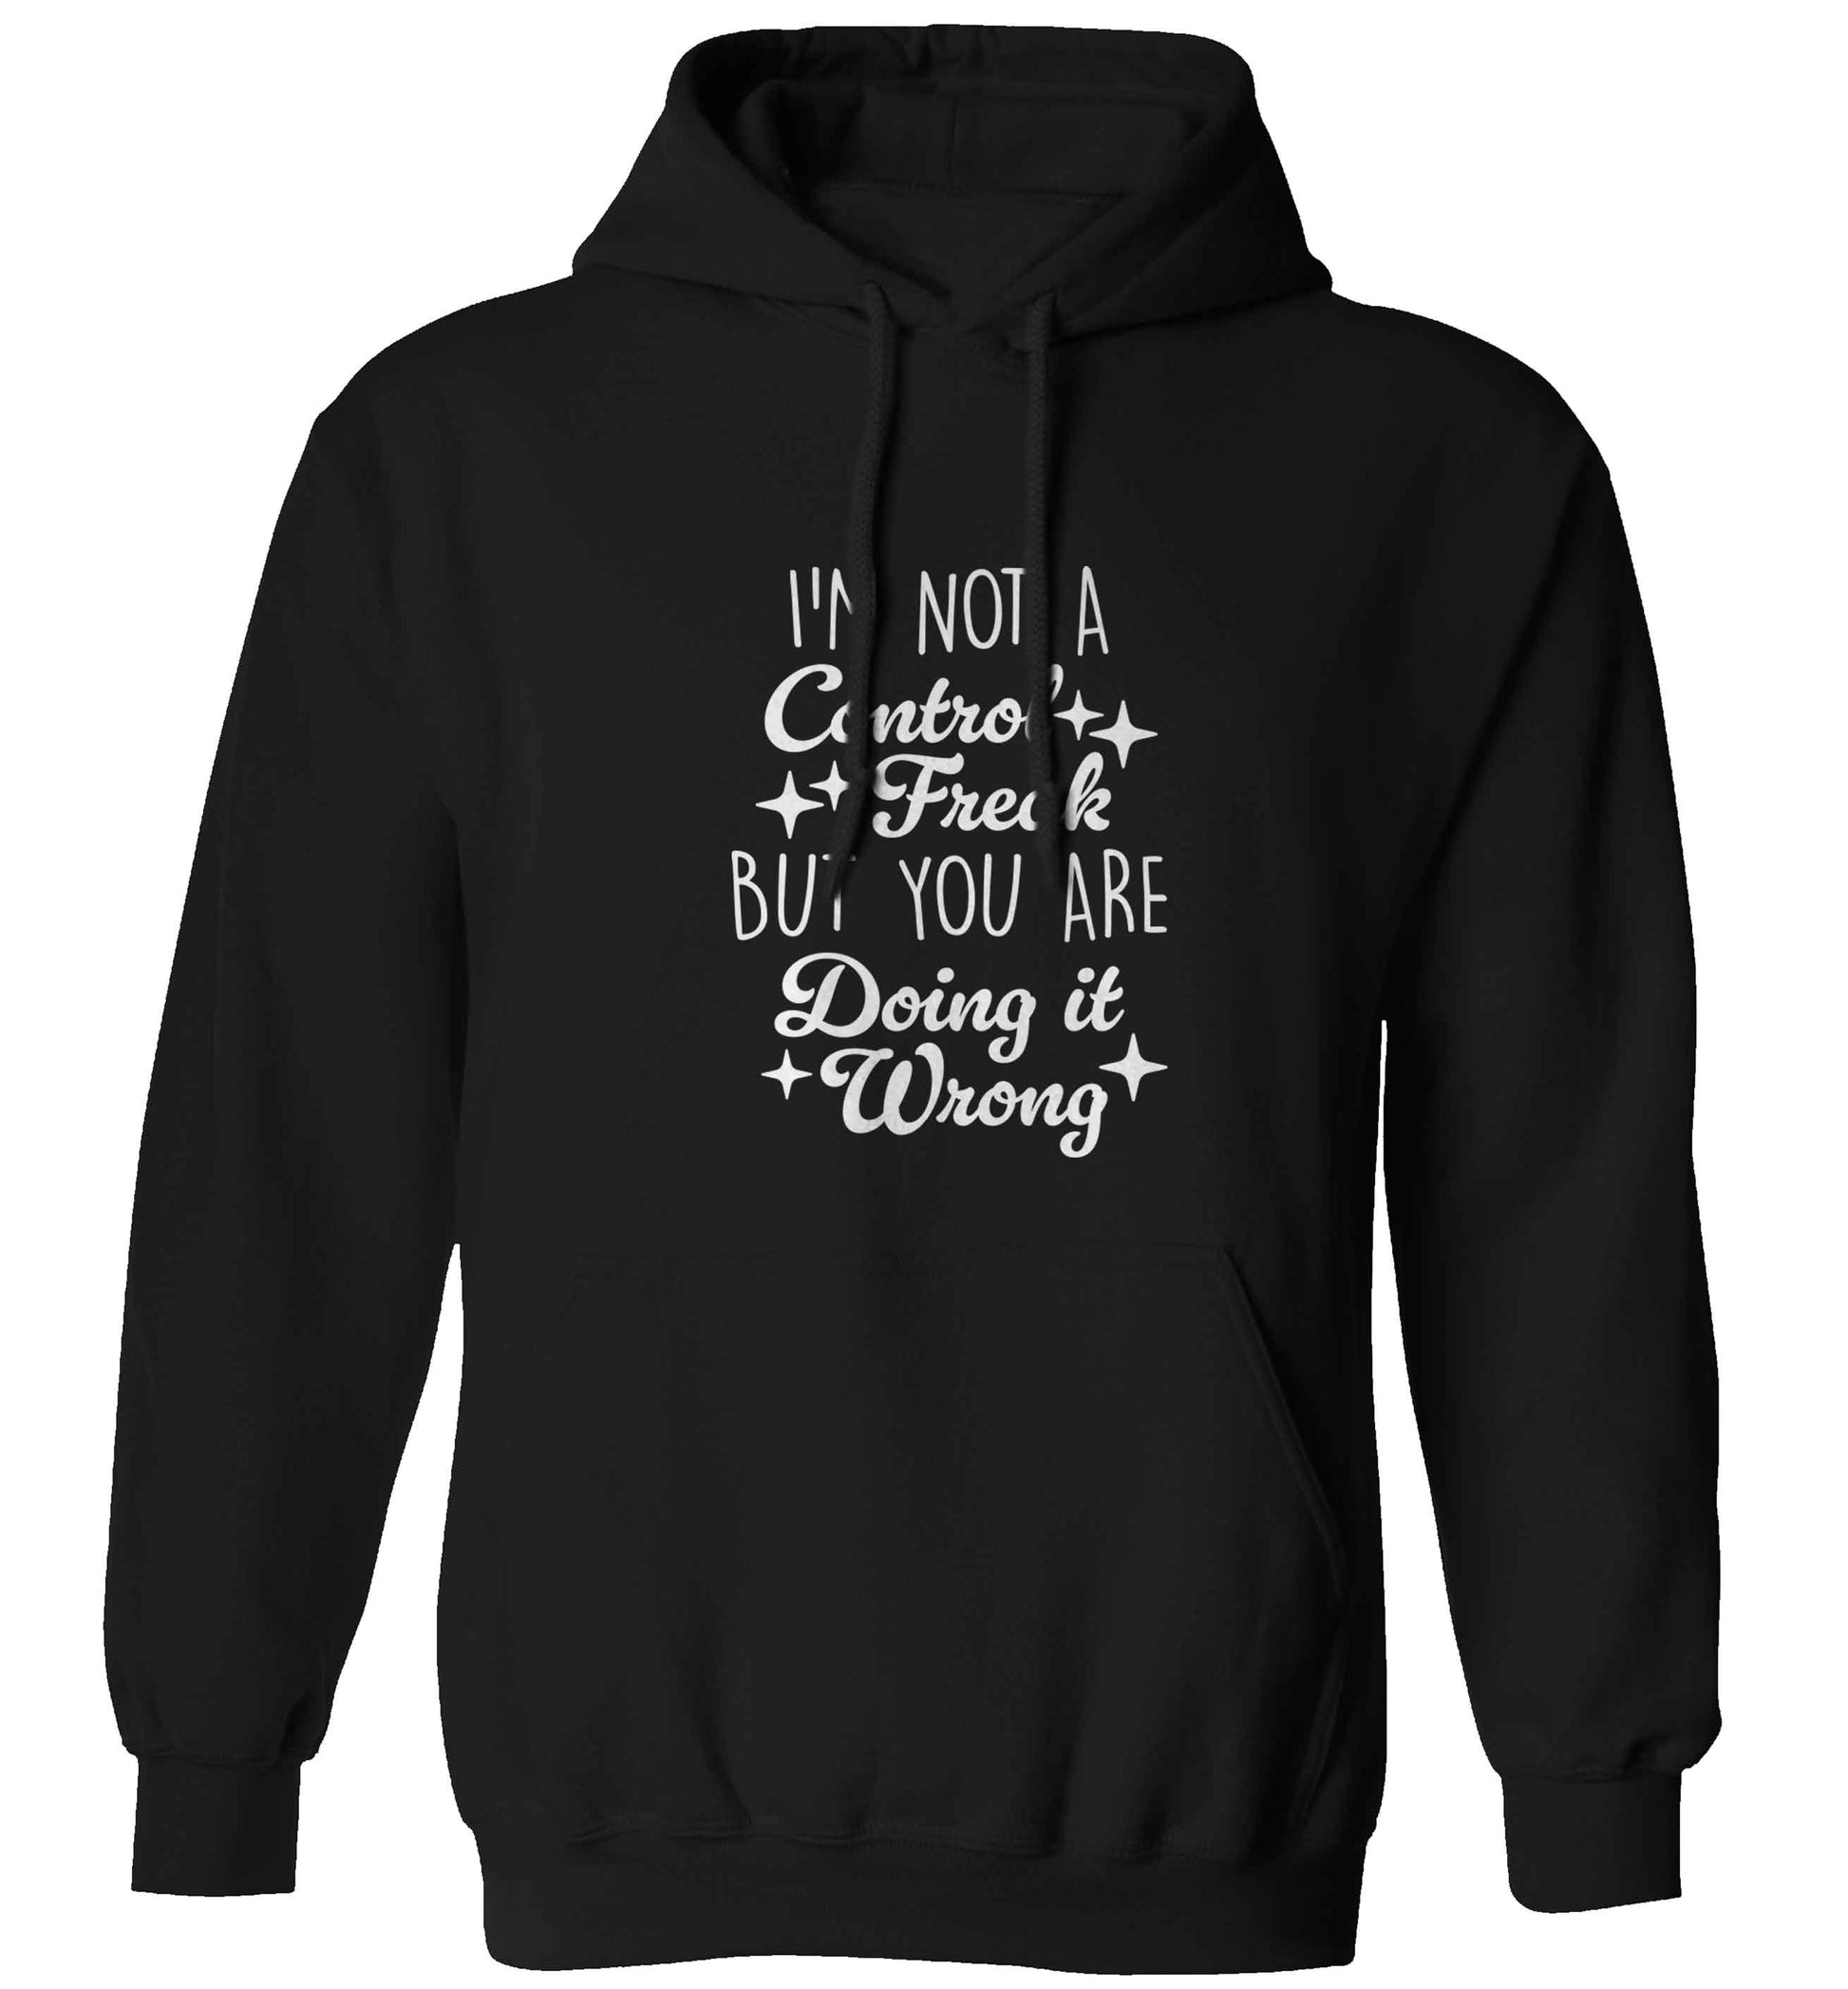 I'm not a control freak but you are doing it wrong adults unisex black hoodie 2XL